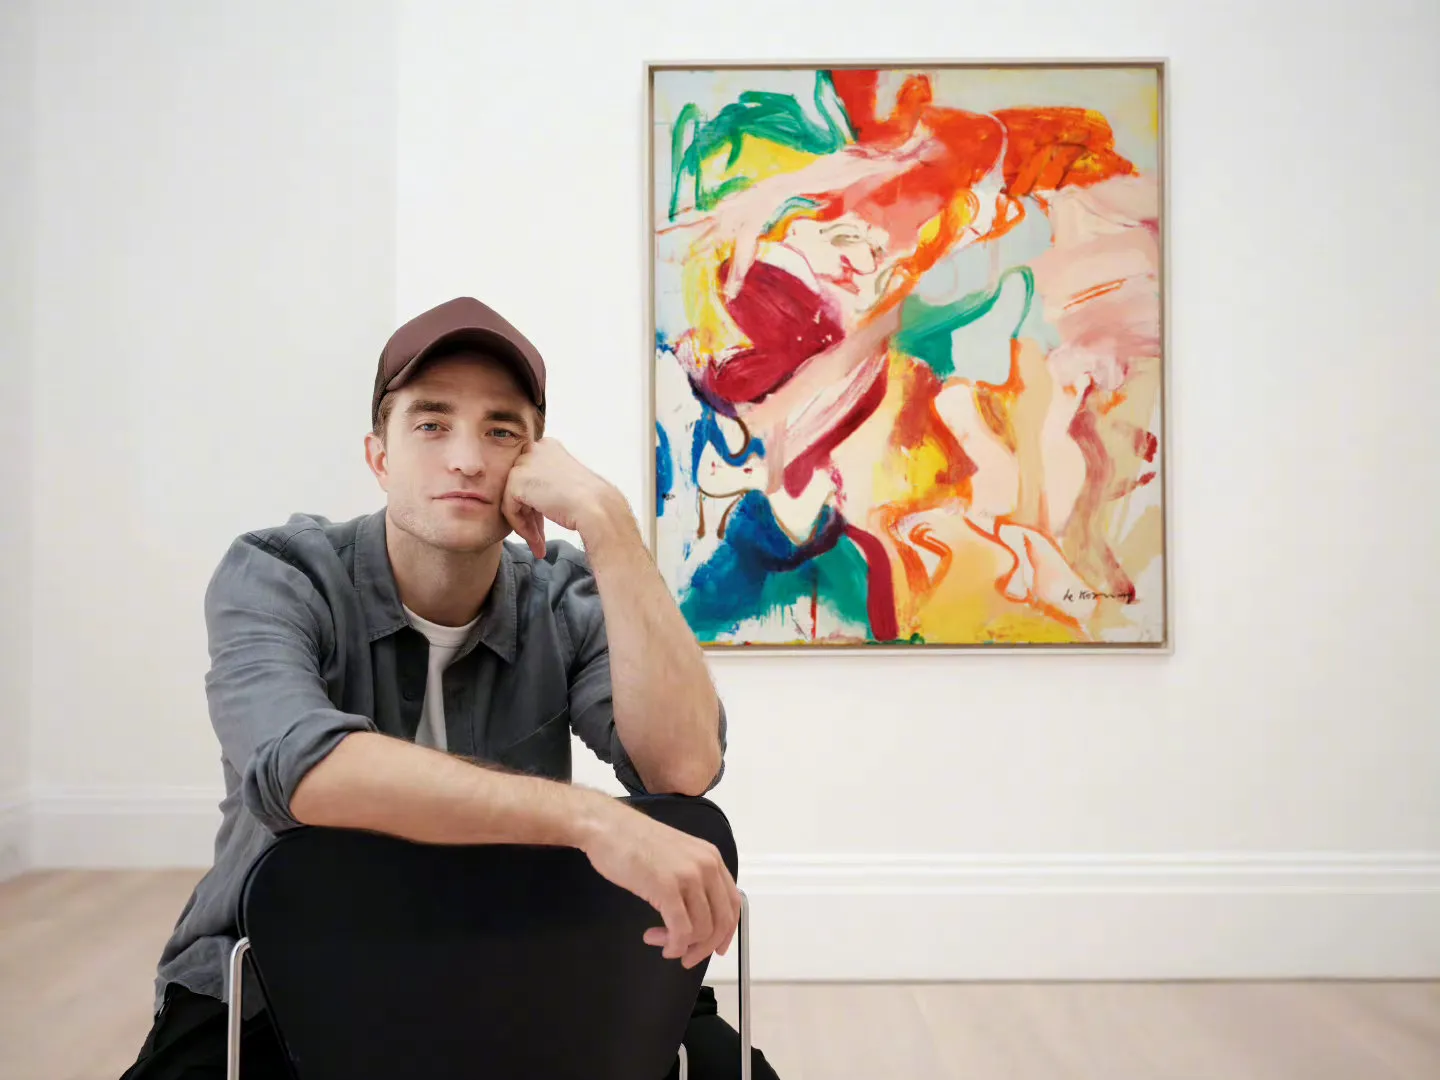 Robert Pattinson, photo of the 'Contemporary Curated' auction | FMV6